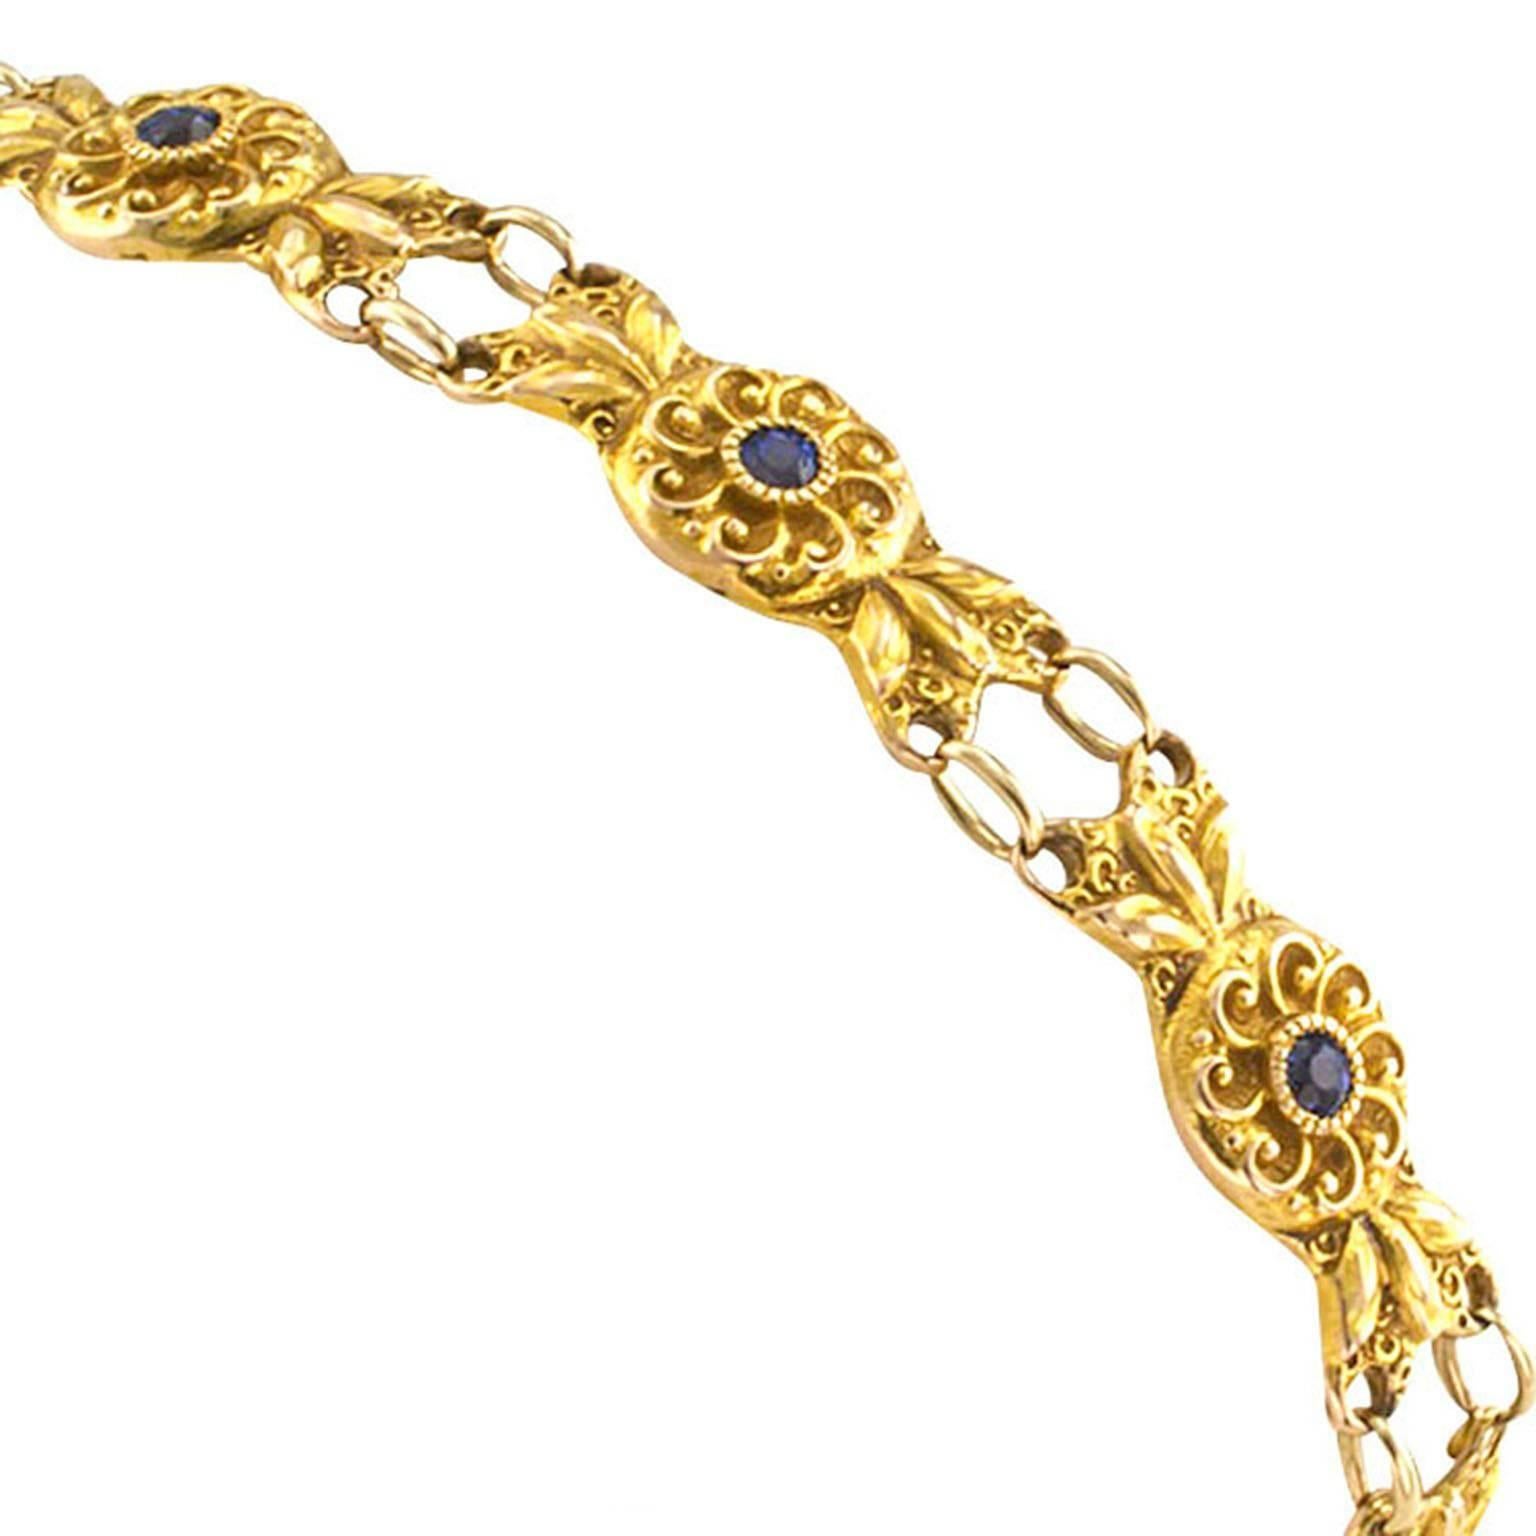 Antique Art Nouveau Sapphire and Gold Bracelet

A pretty garland of gold flowers to dangle from your wrist... What a lovely sight!  Each link centers upon a small round blue sapphire... The gold itself displaying a patina that... well, took over